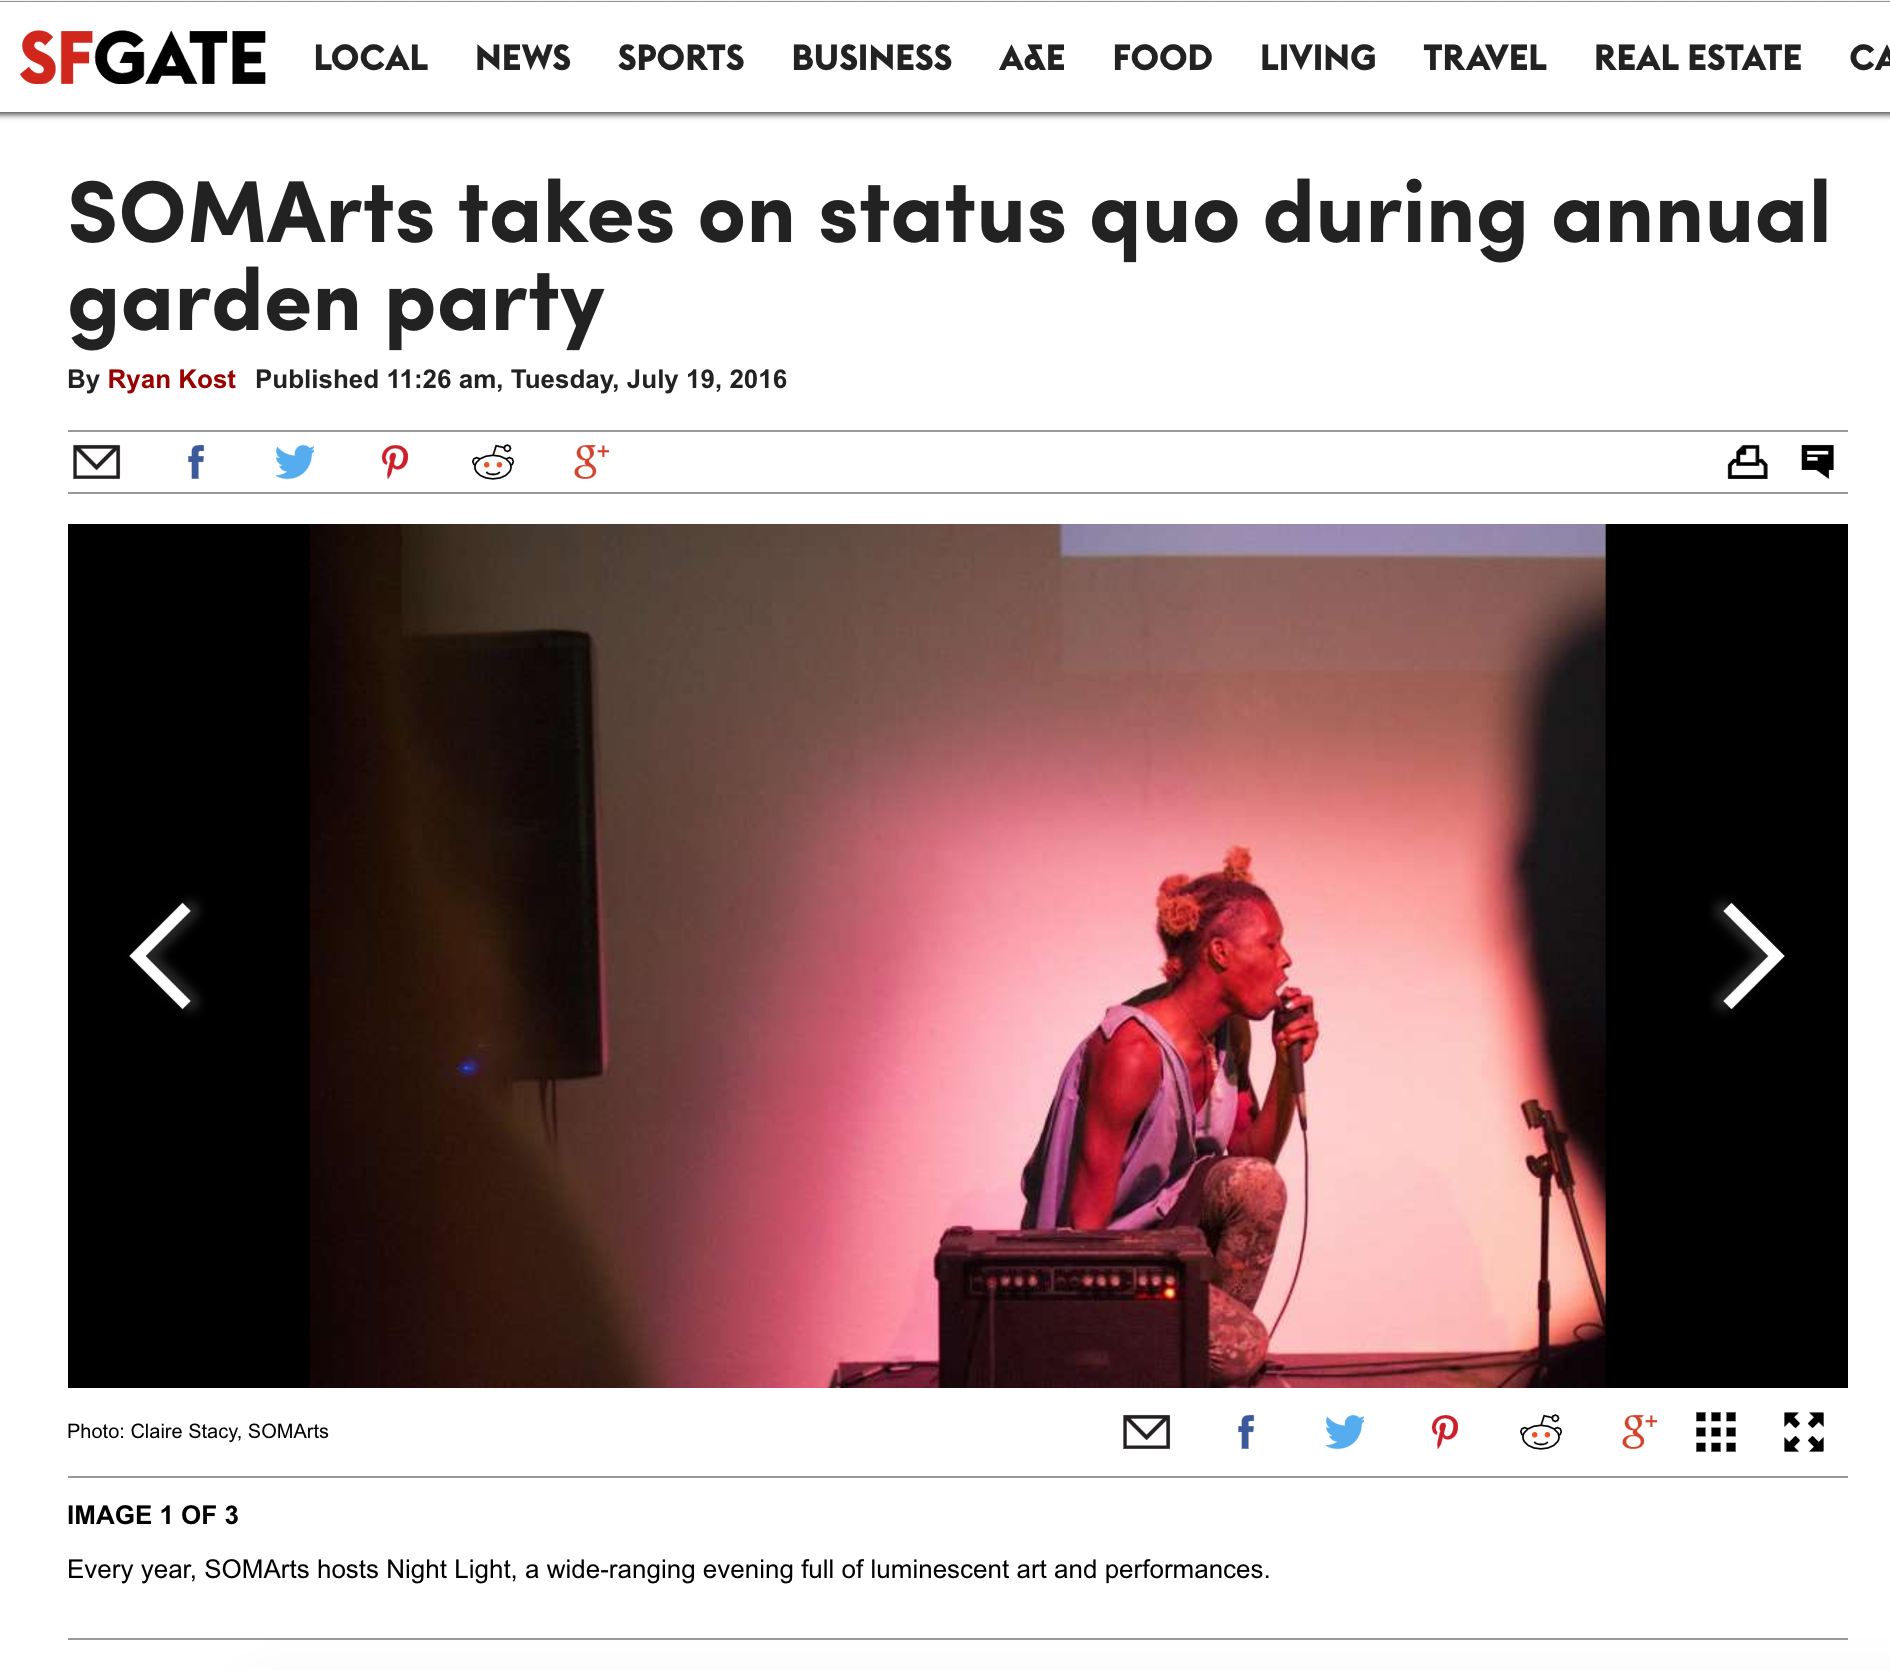 SOMArts takes on status quo during annual garden party